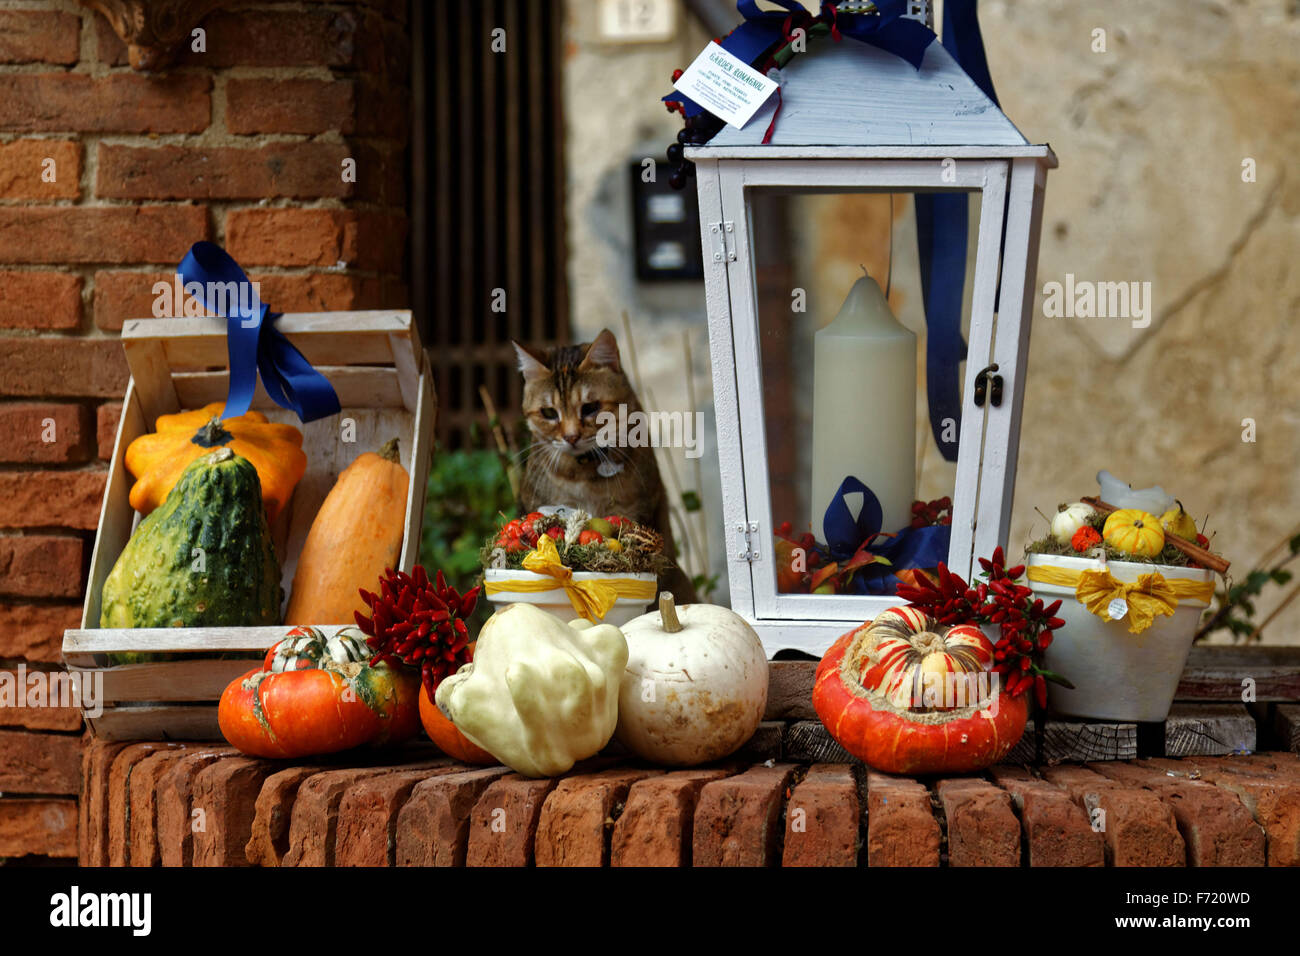 A cat keeps watch over a selection of gourds on display at a market in Italy. Stock Photo